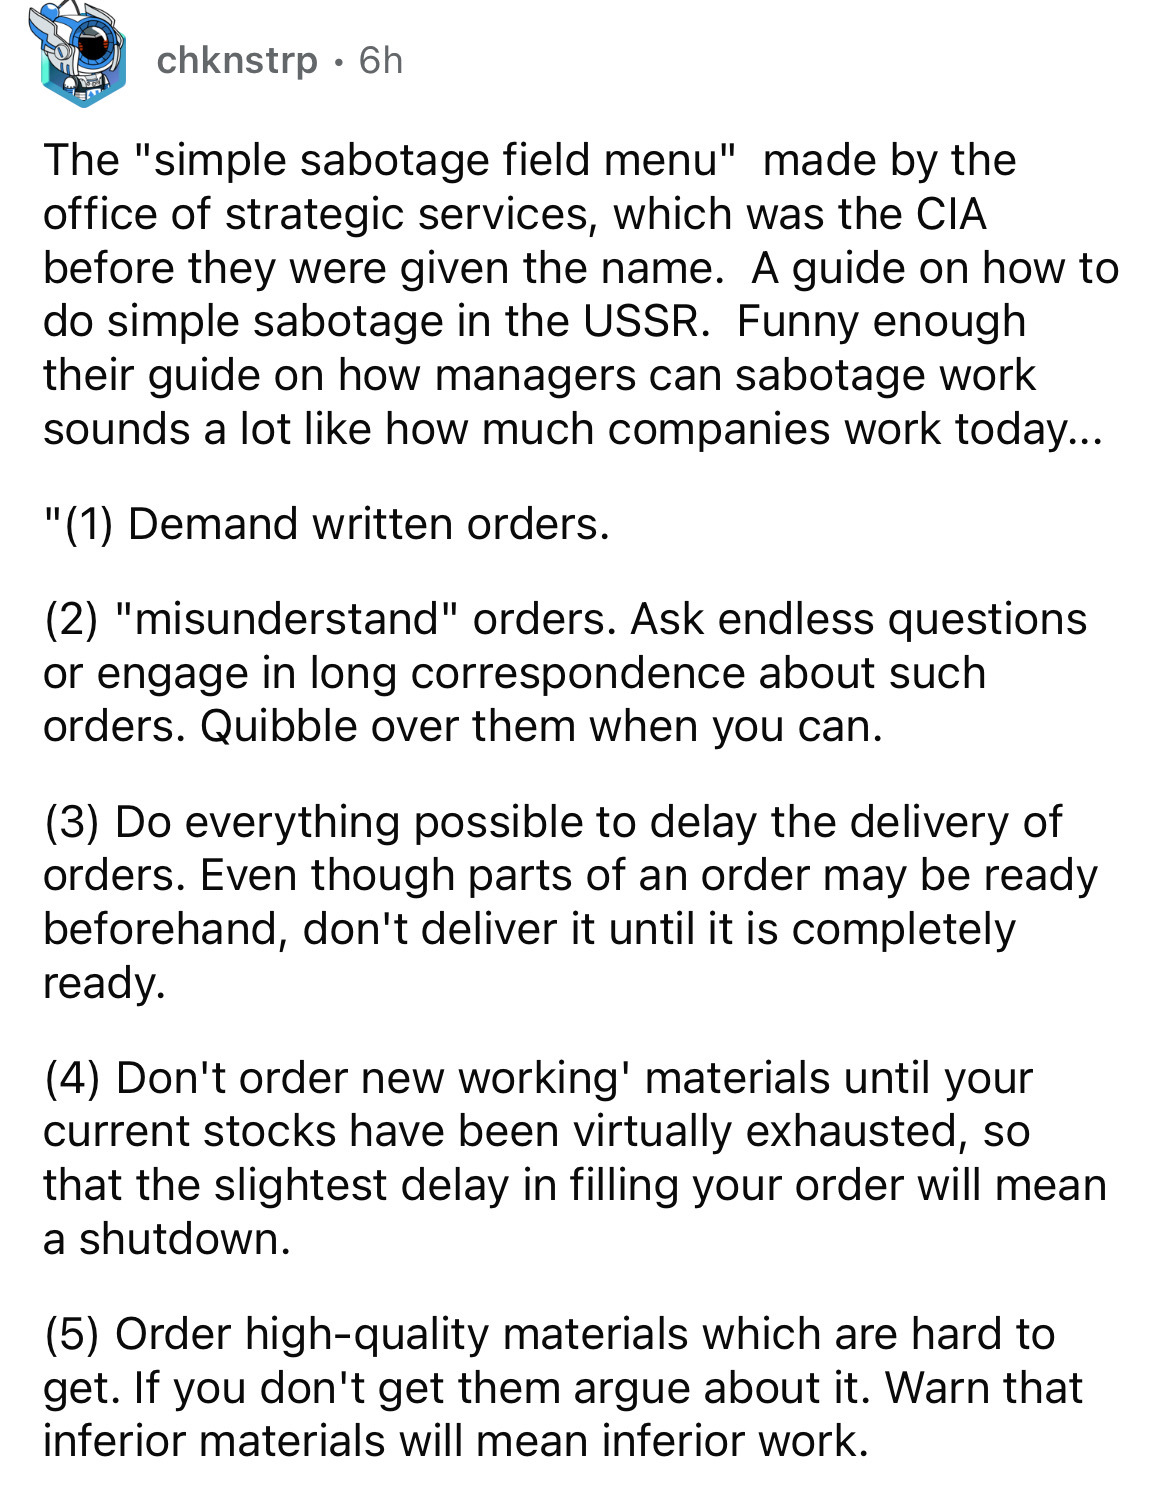 document - chknstrp. 6h The "simple sabotage field menu" made by the office of strategic services, which was the Cia before they were given the name. A guide on how to do simple sabotage in the Ussr. Funny enough their guide on how managers can sabotage w